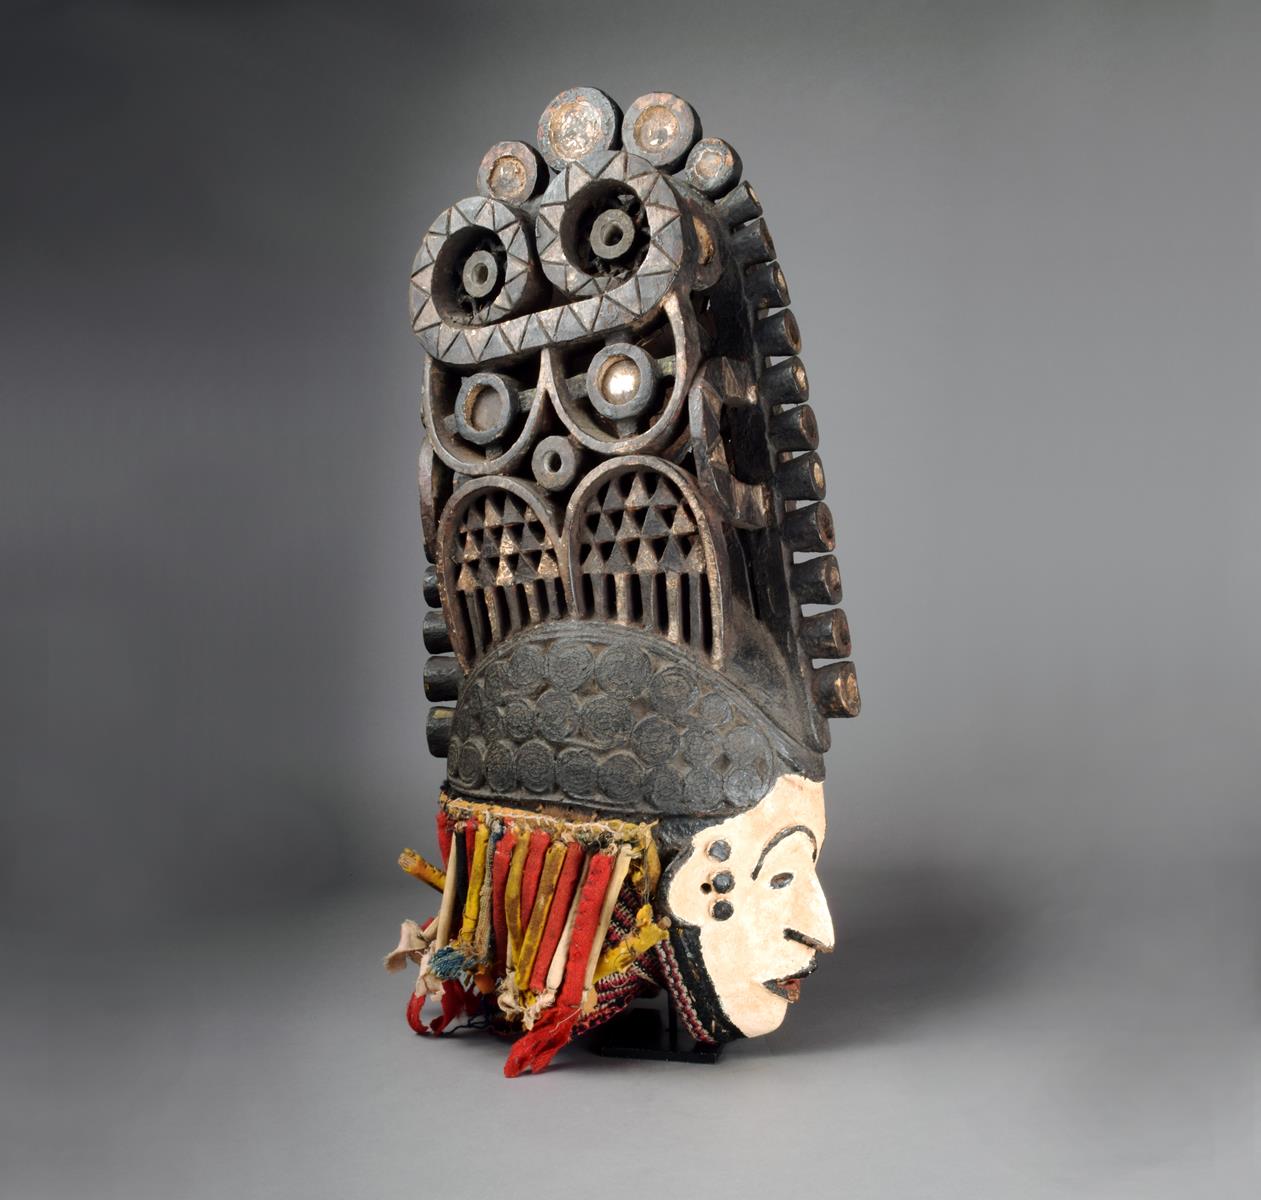 An Igbo spirit mask Nigeria with a white painted face and tight curled coiffure with a large